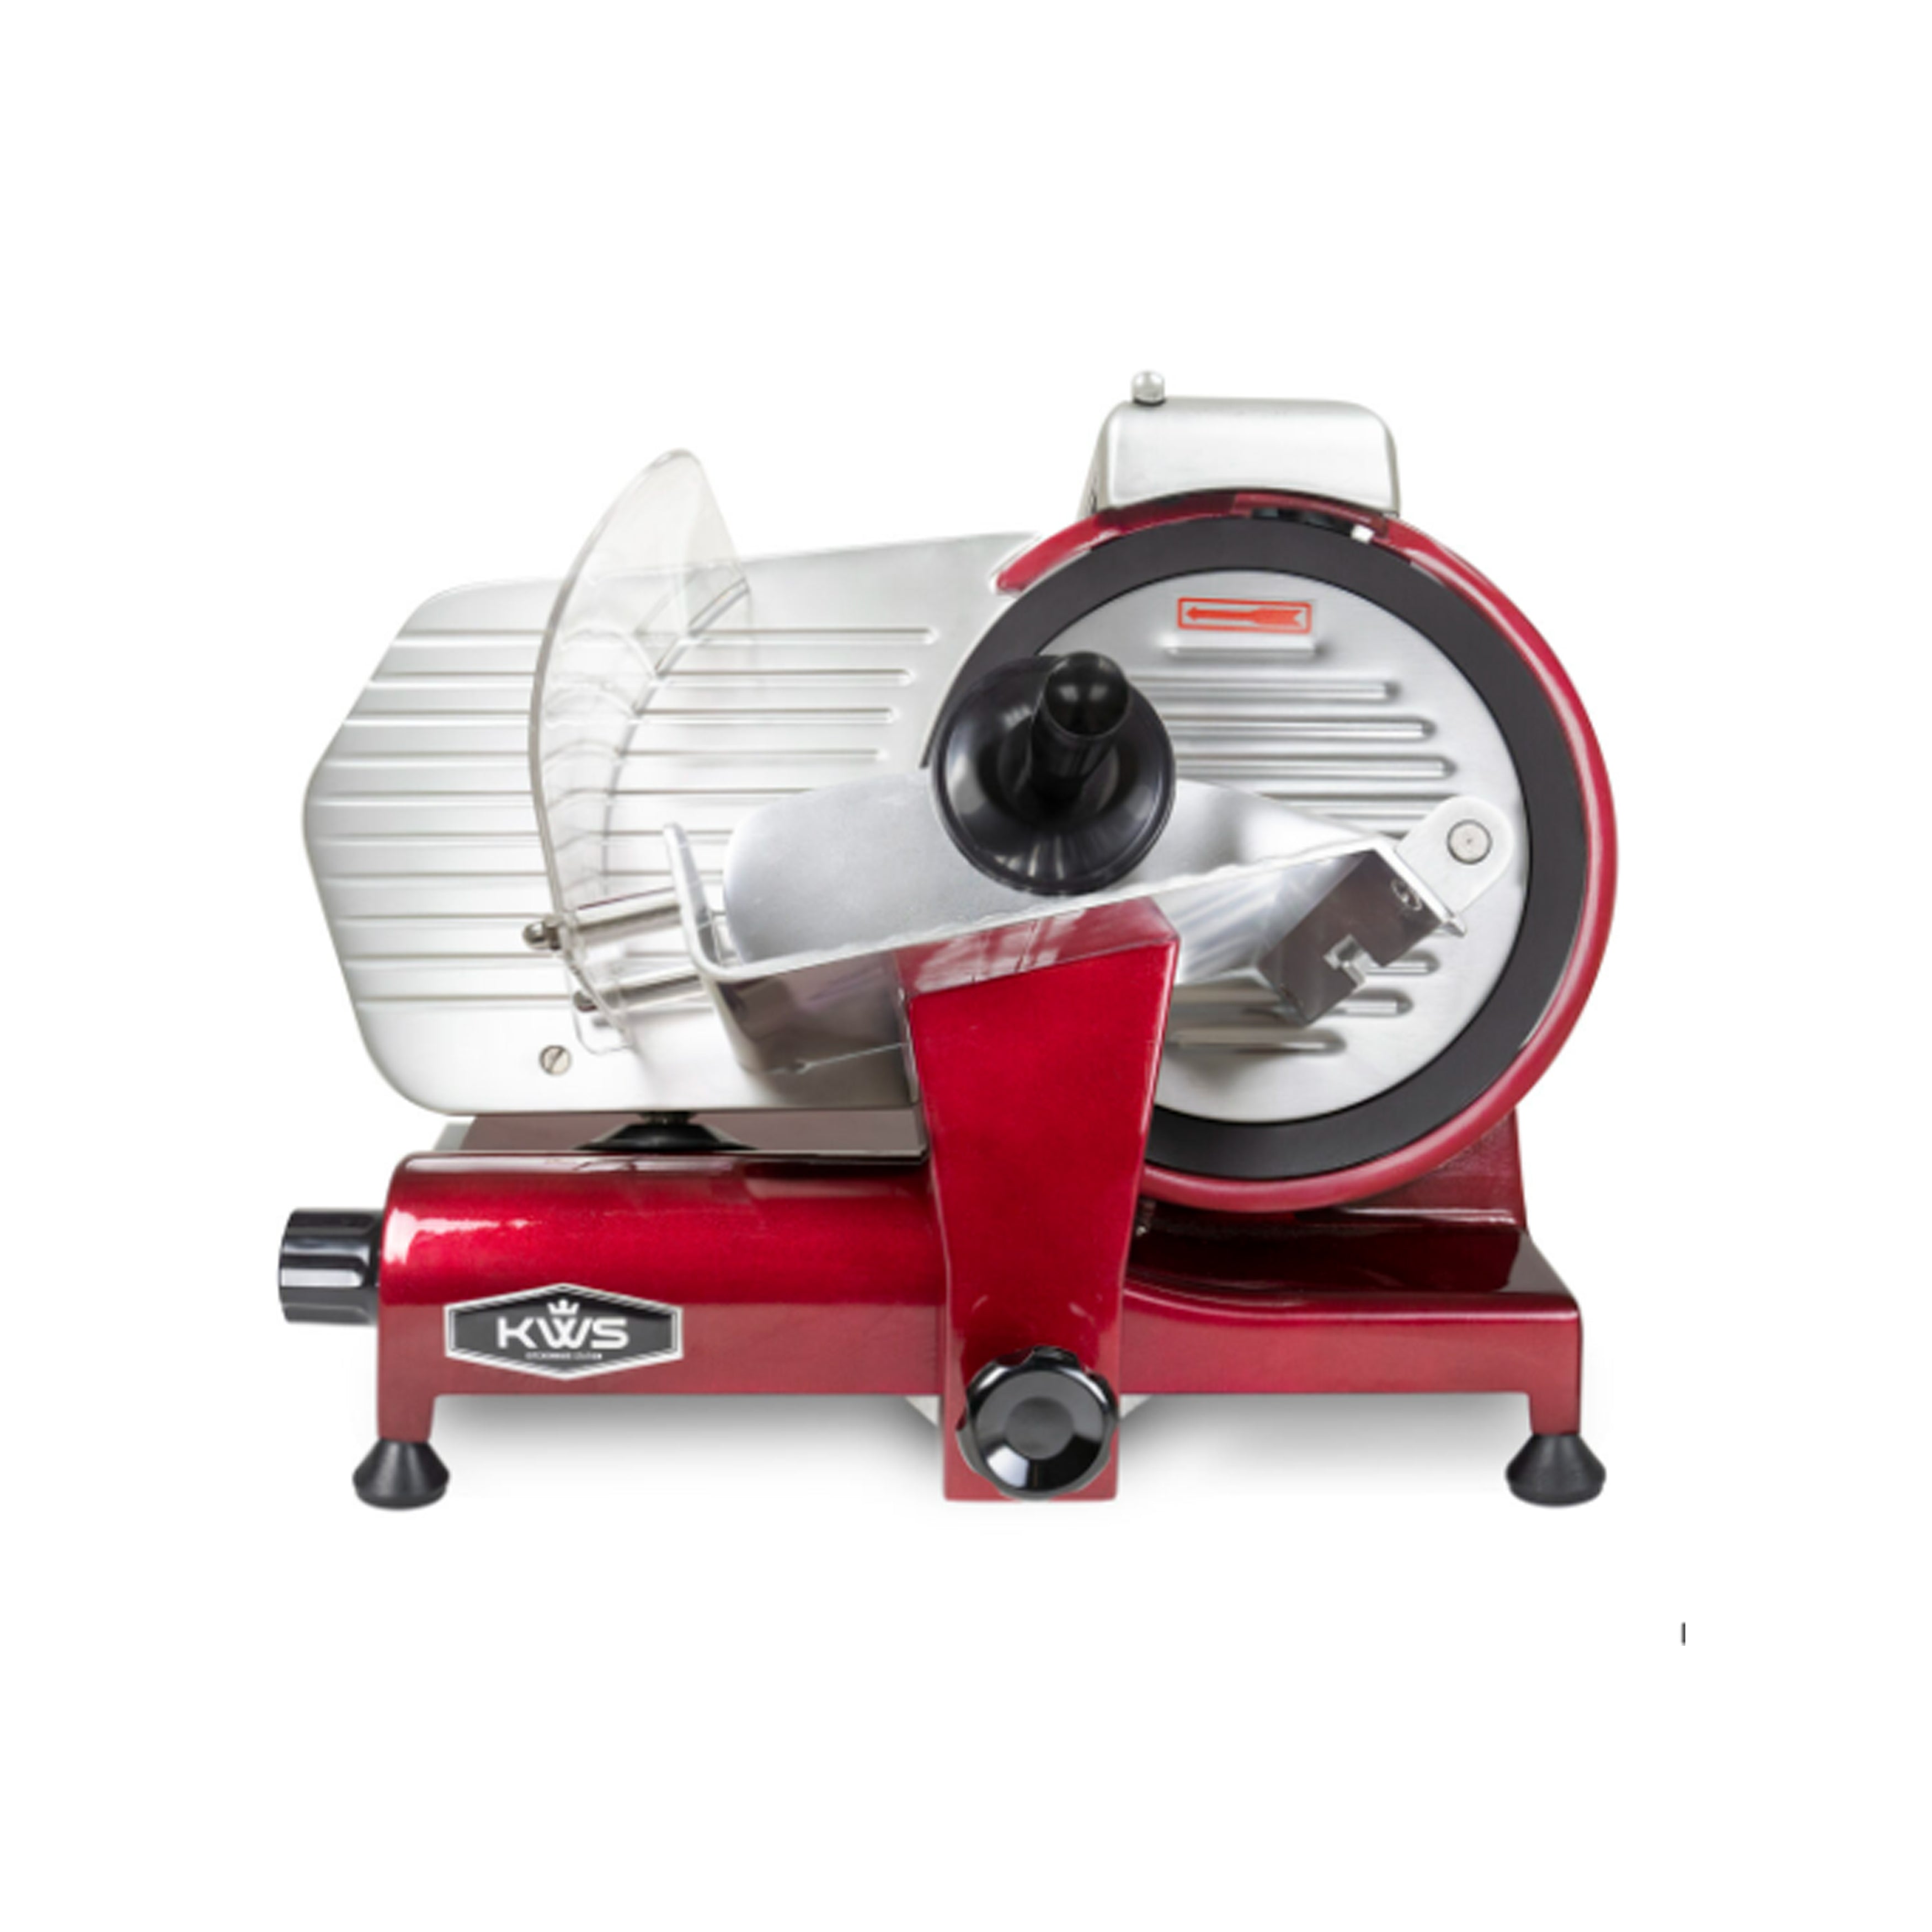 KWS - MS-10XT, Commercial 10″ Meat Slicer in Red Base with Teflon Blade